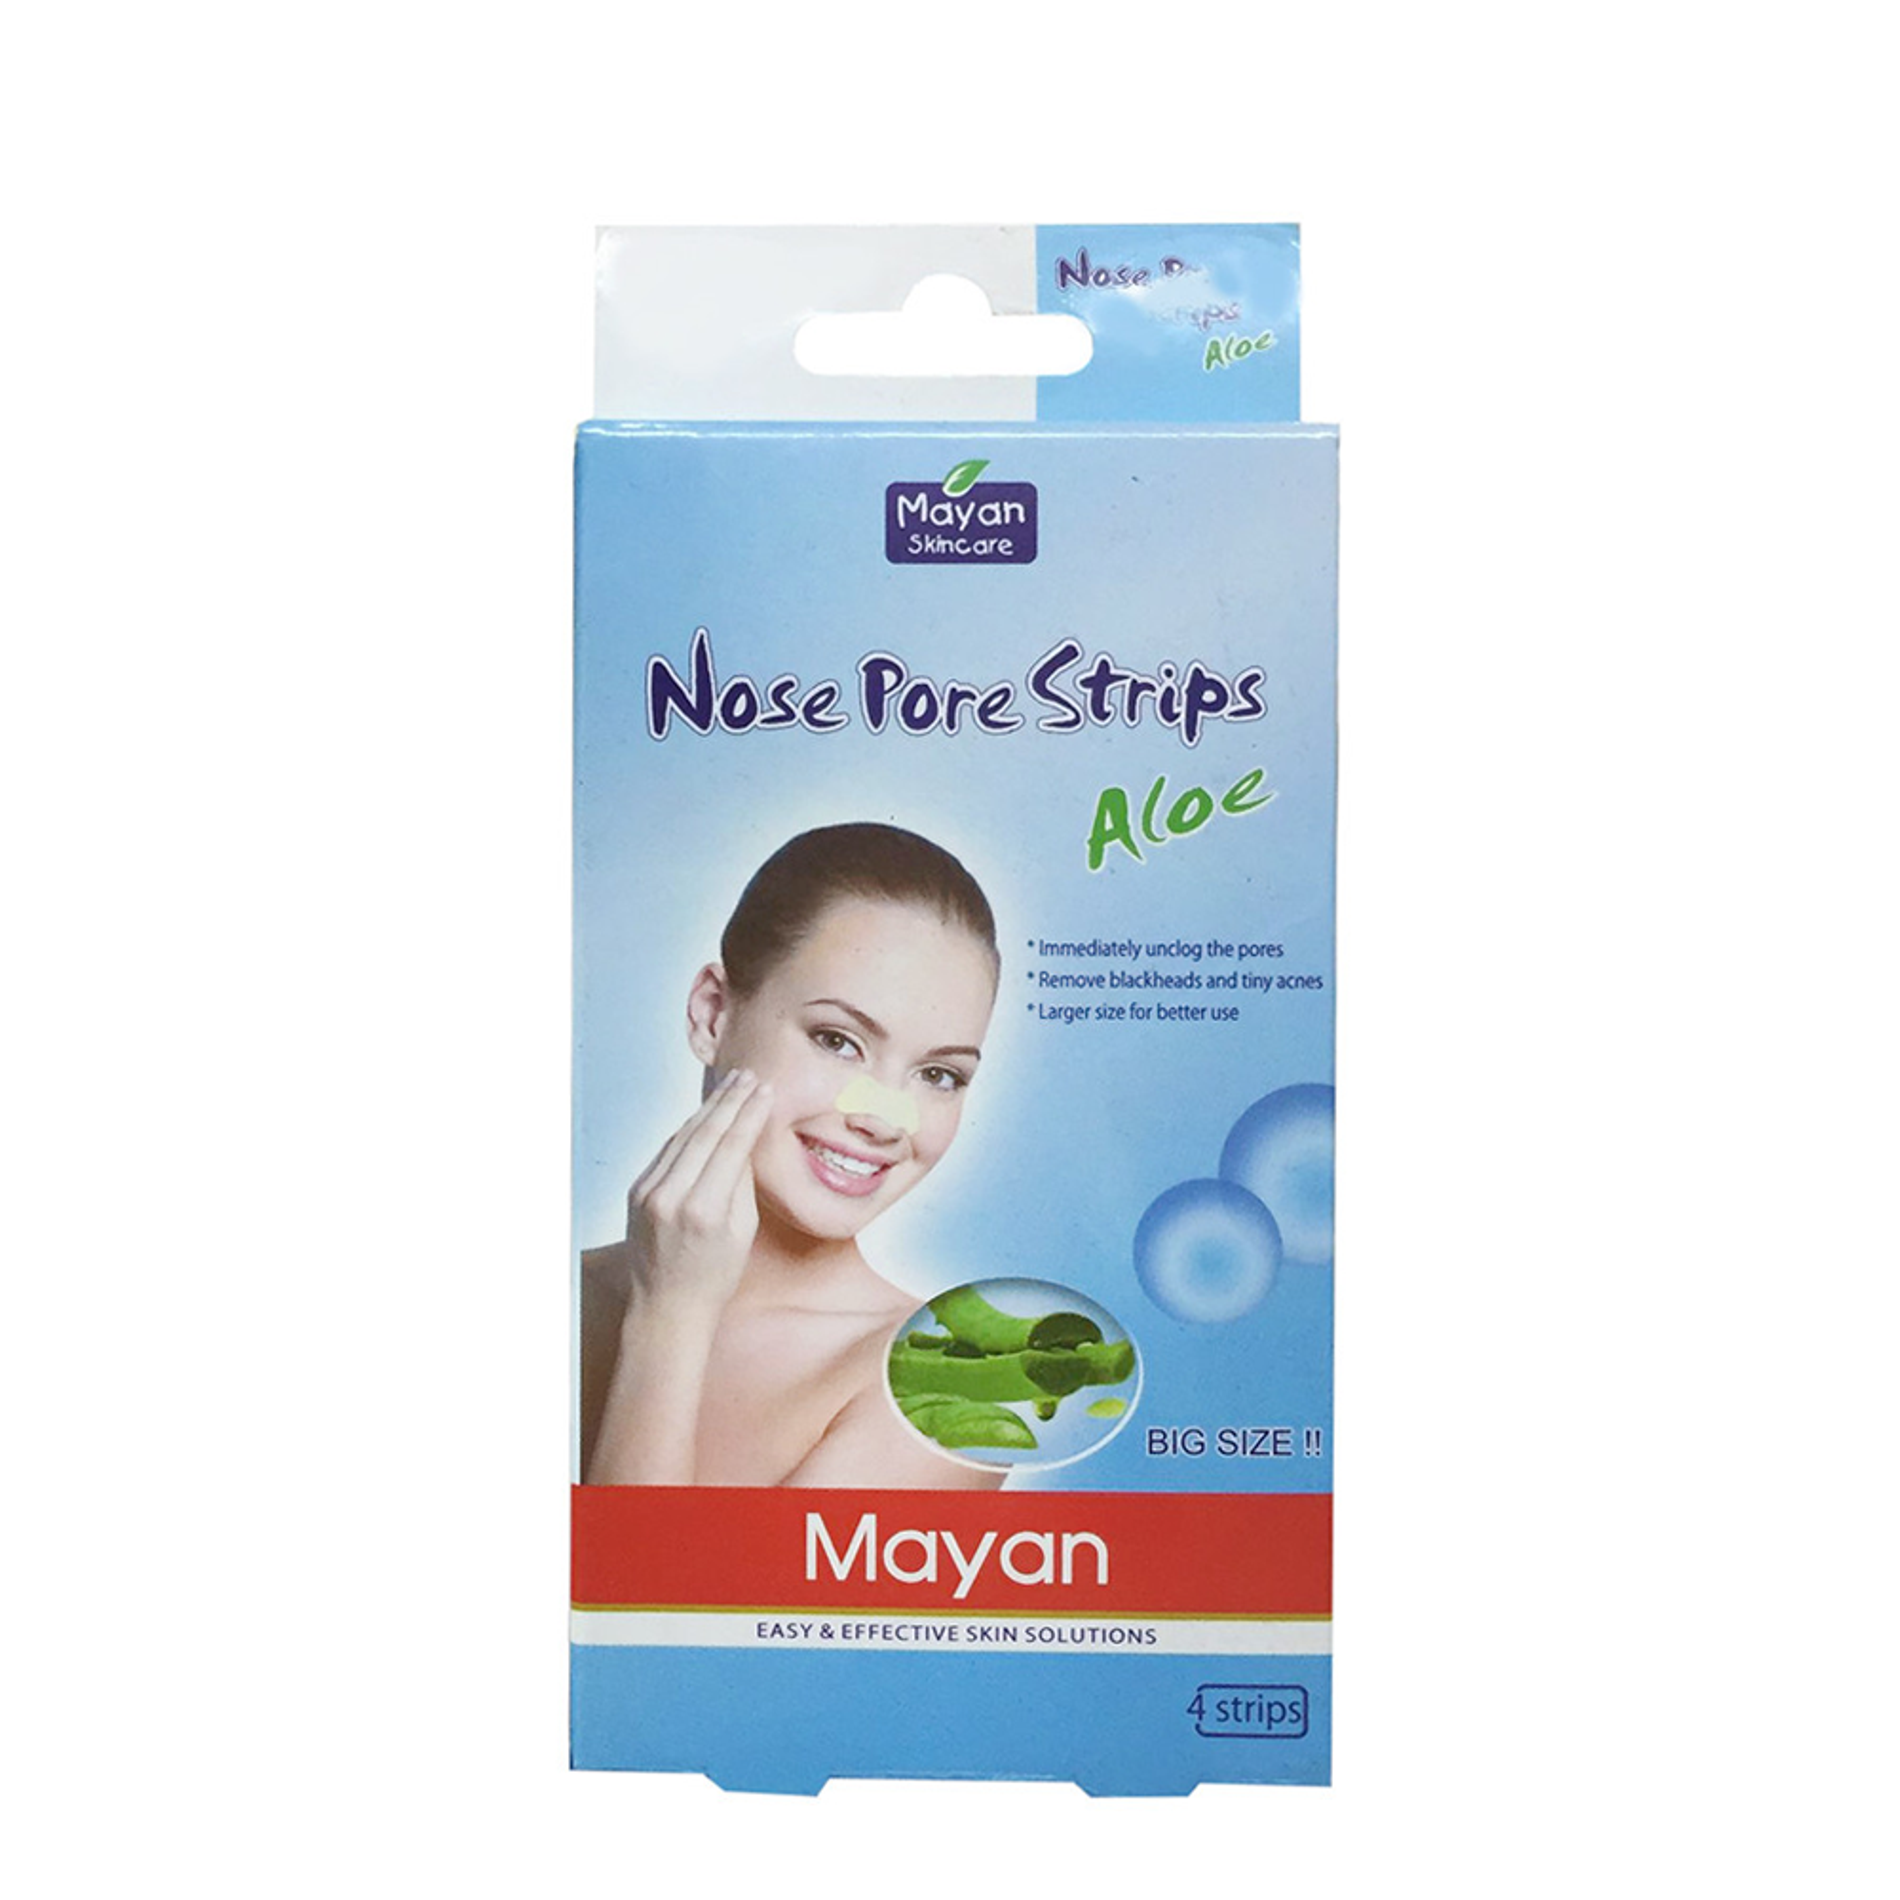 mieng-lot-mun-cam-mayan-power-nose-cleaning-strips-4-mieng-6